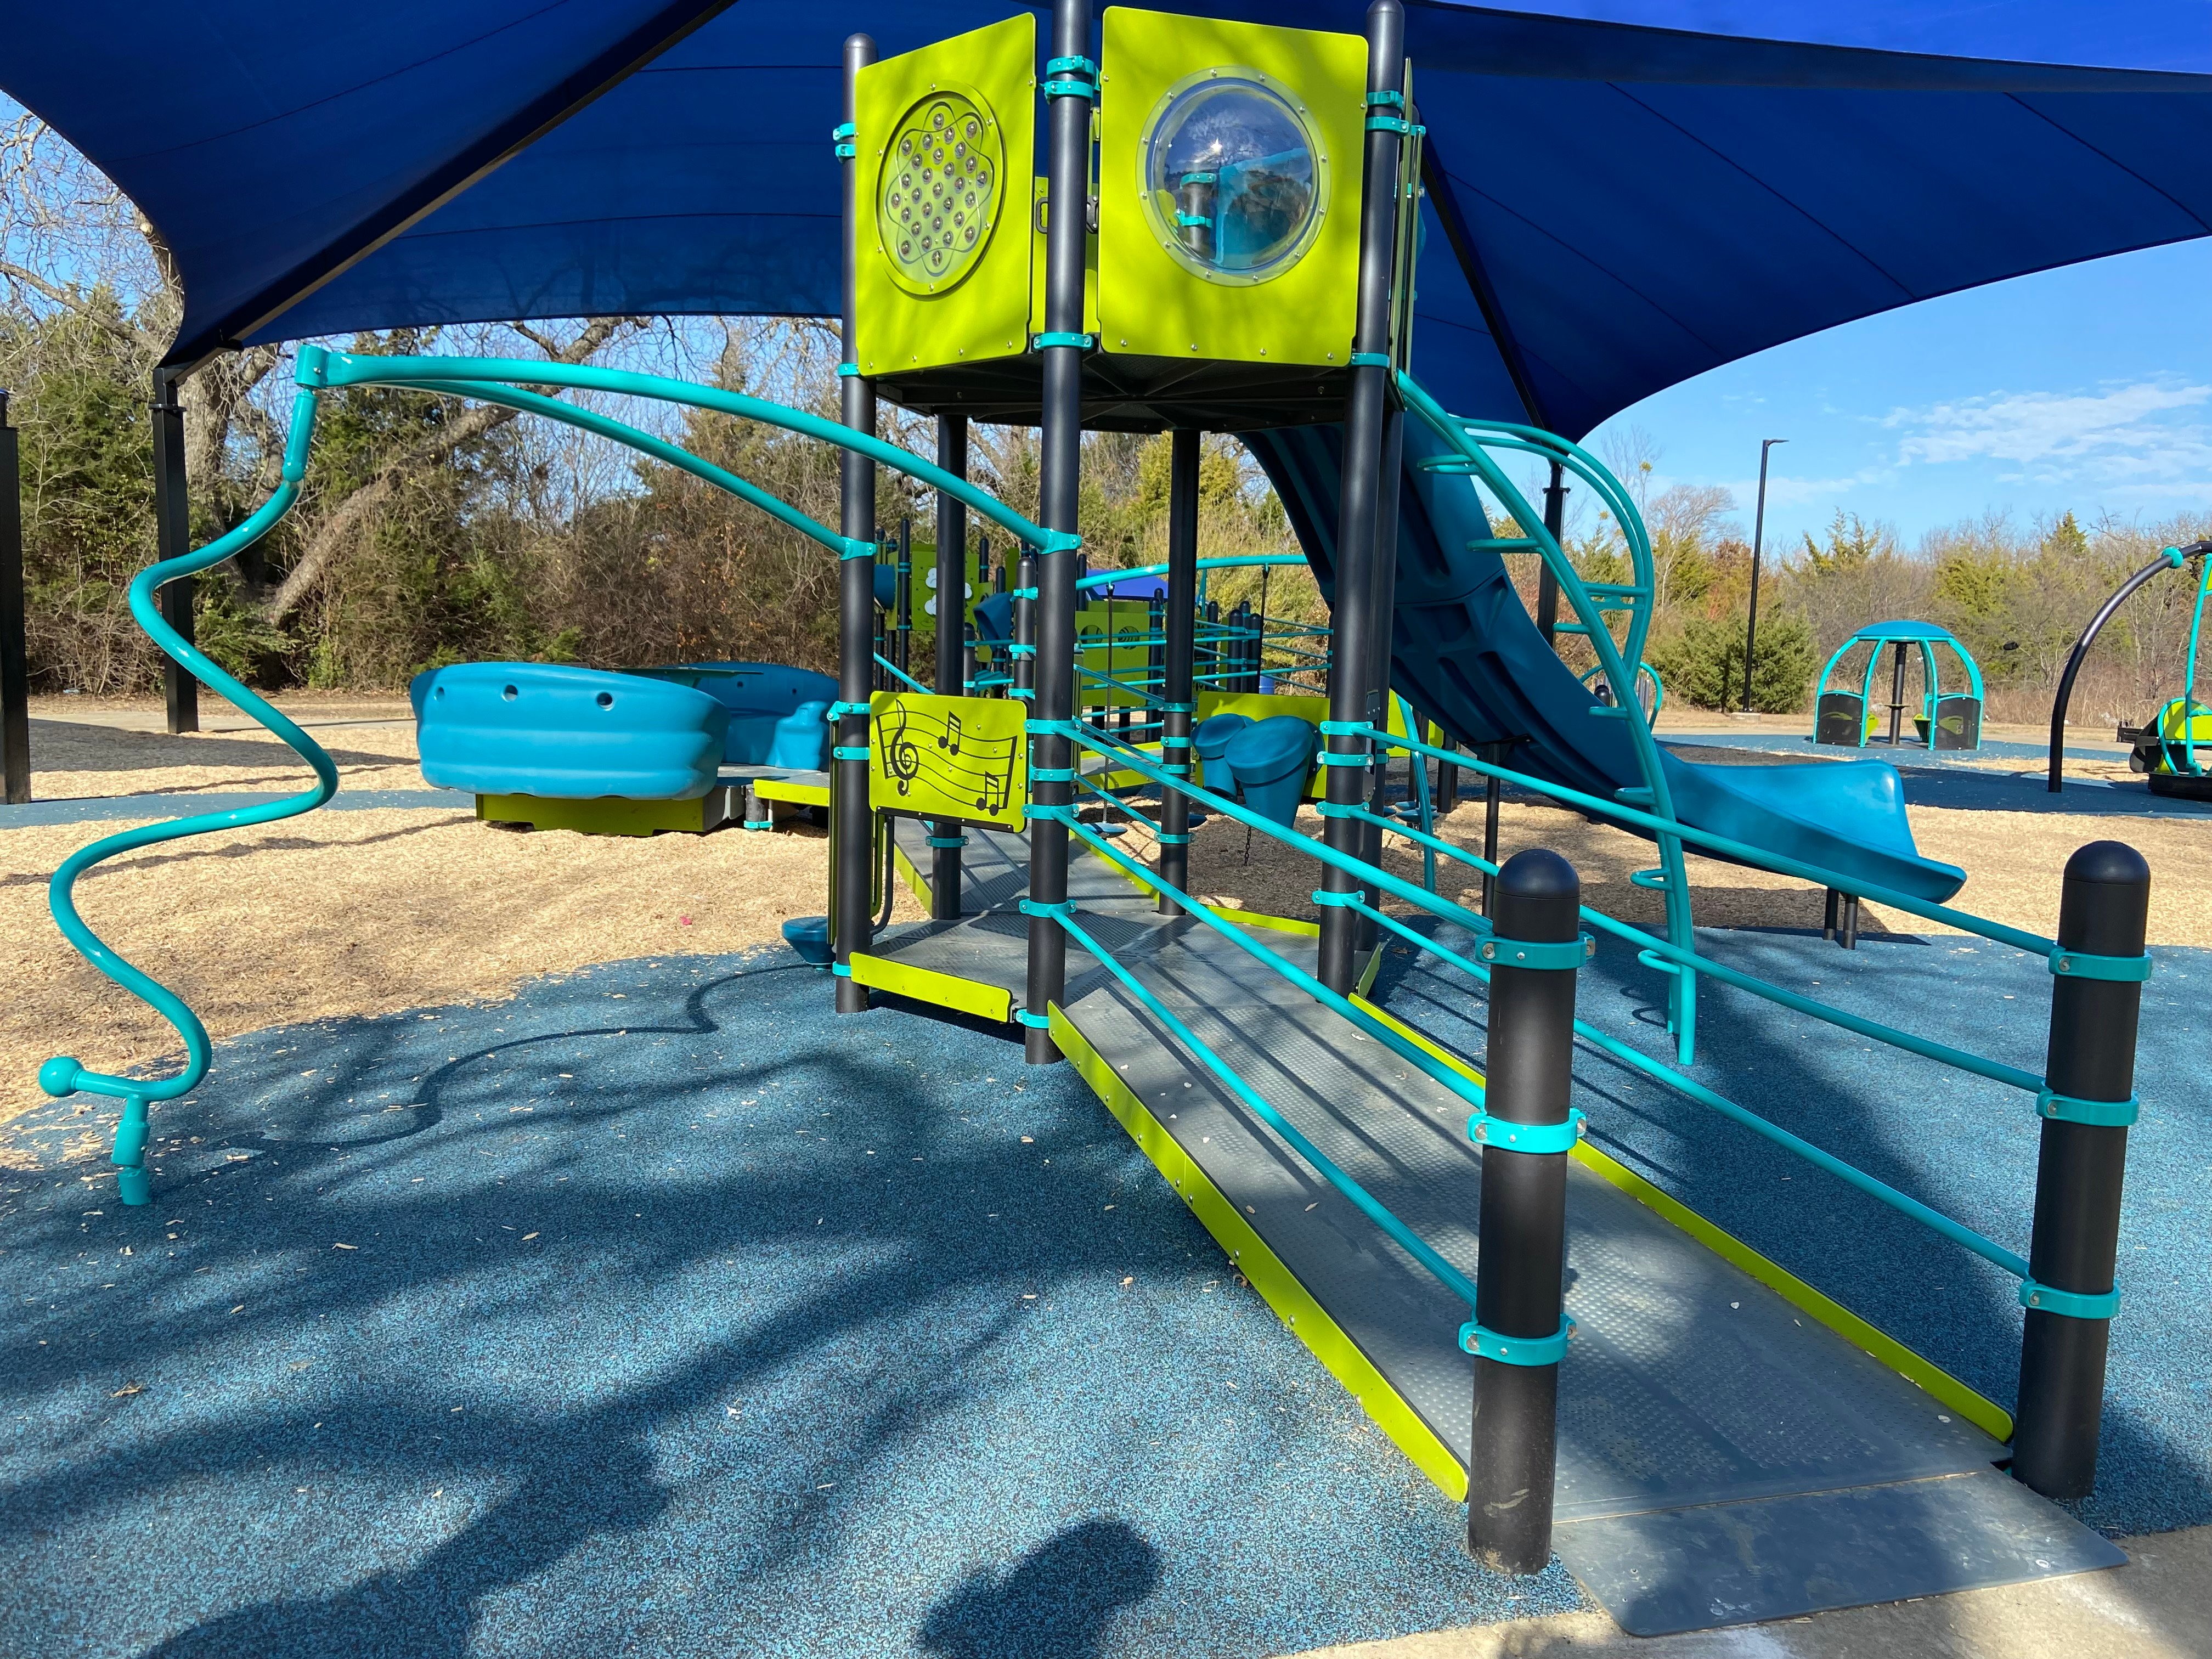 Ernie Roberts Park in DeSoto, TX, transformed into an inclusive playground, enhancing community joy and accessibility.